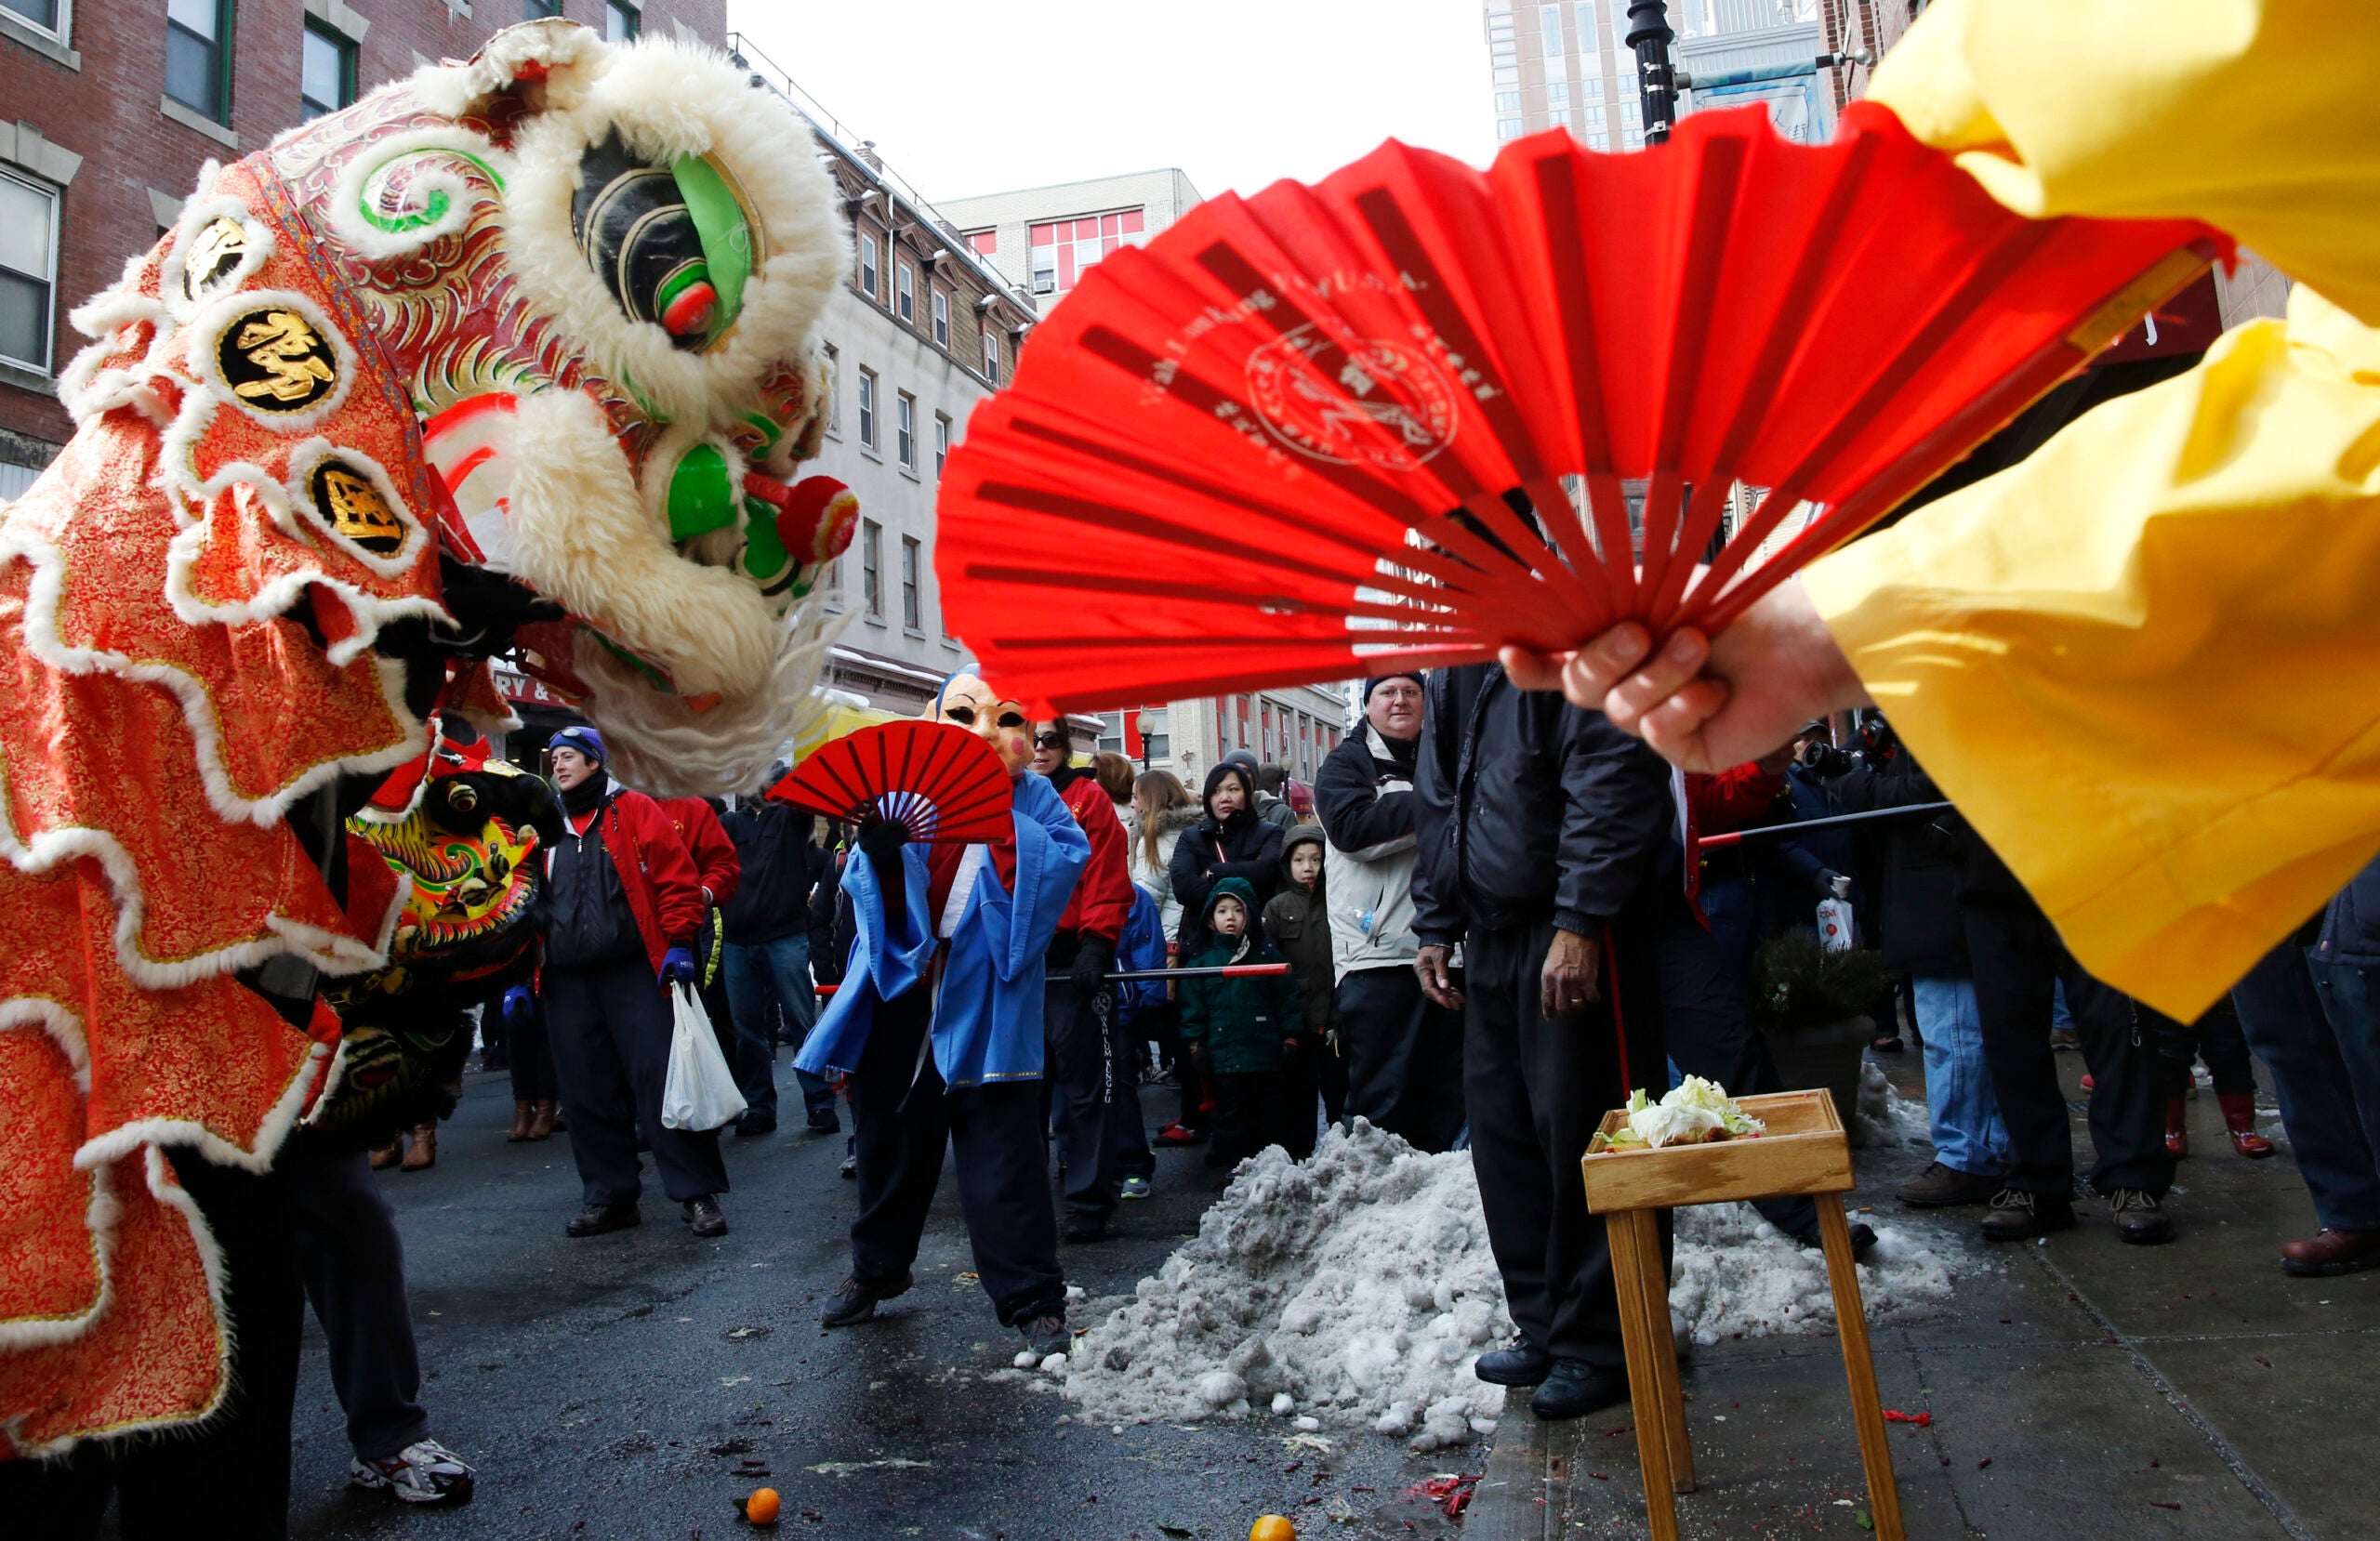 TAT ushers in Chinese New Year with nationwide celebrations